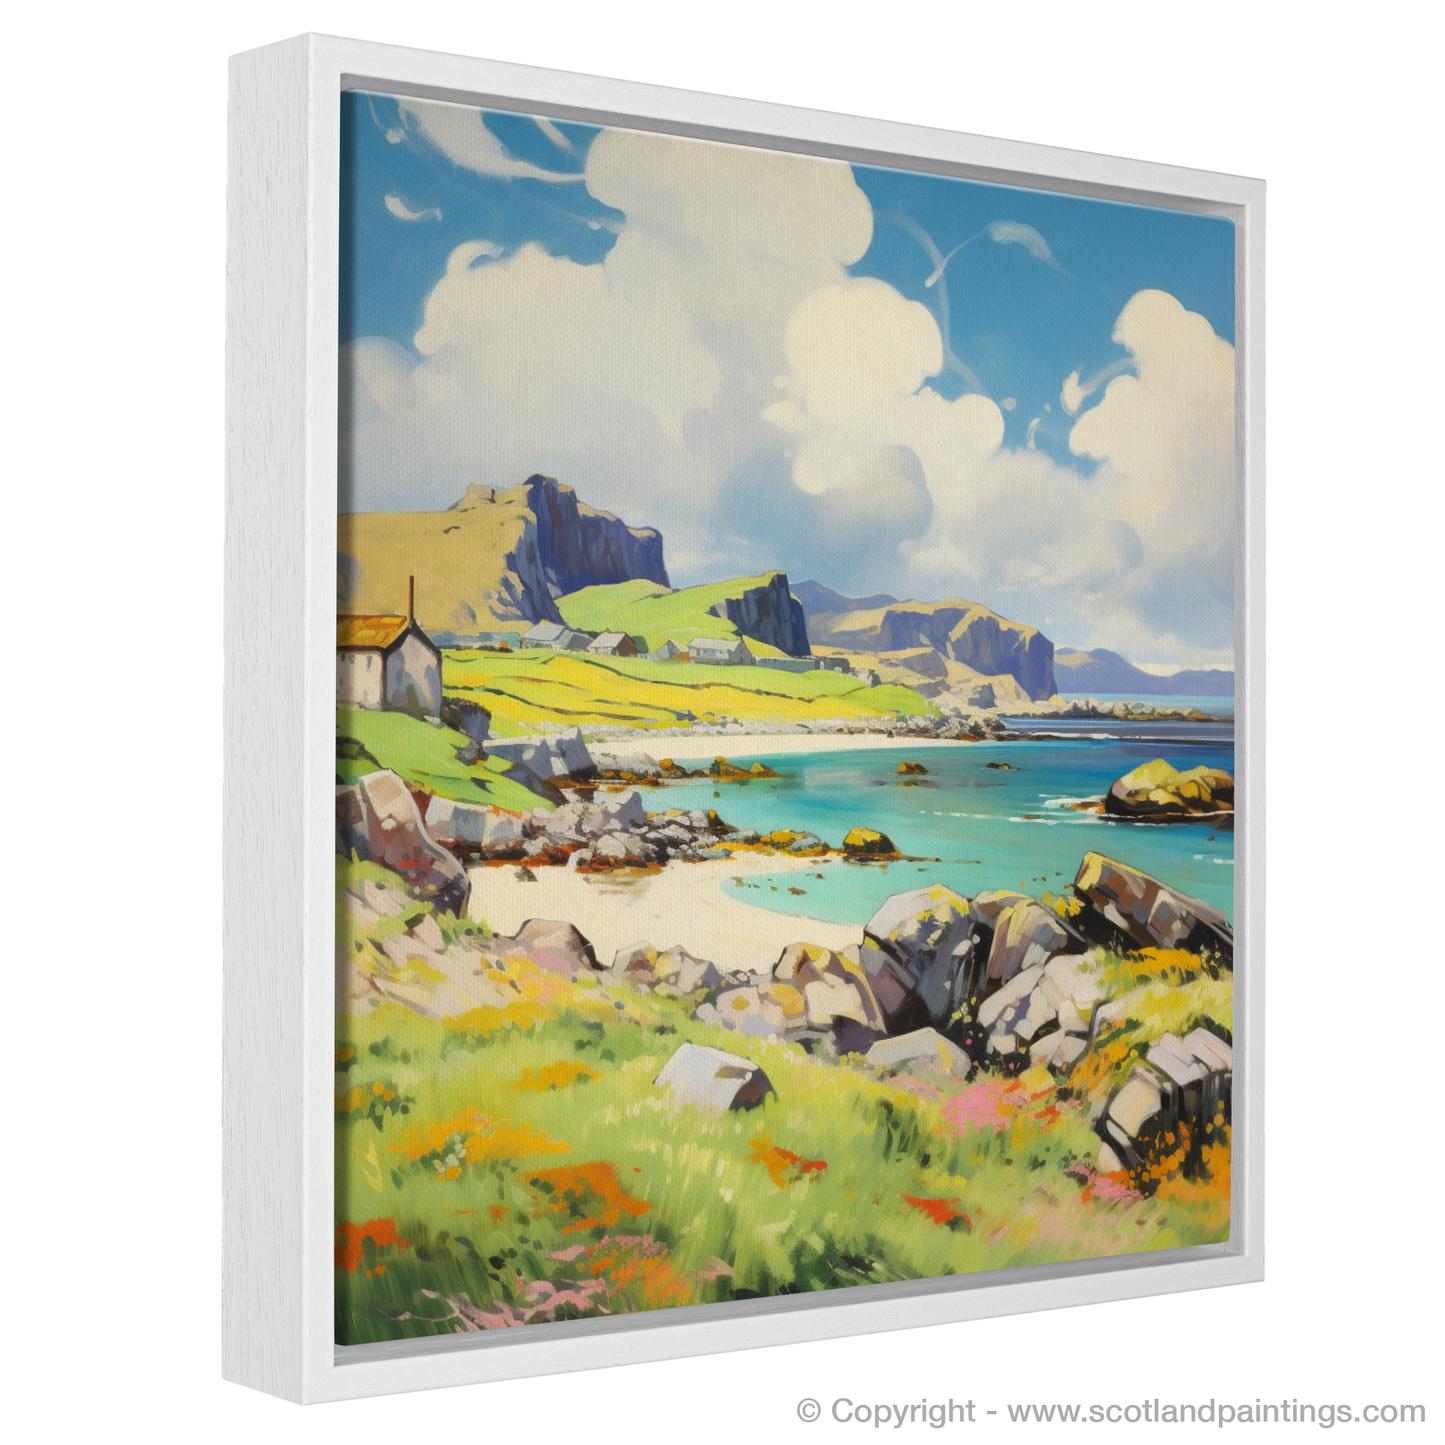 Painting and Art Print of Isle of Mull, Inner Hebrides in summer entitled "Summer Serenade: Vibrant Isle of Mull".